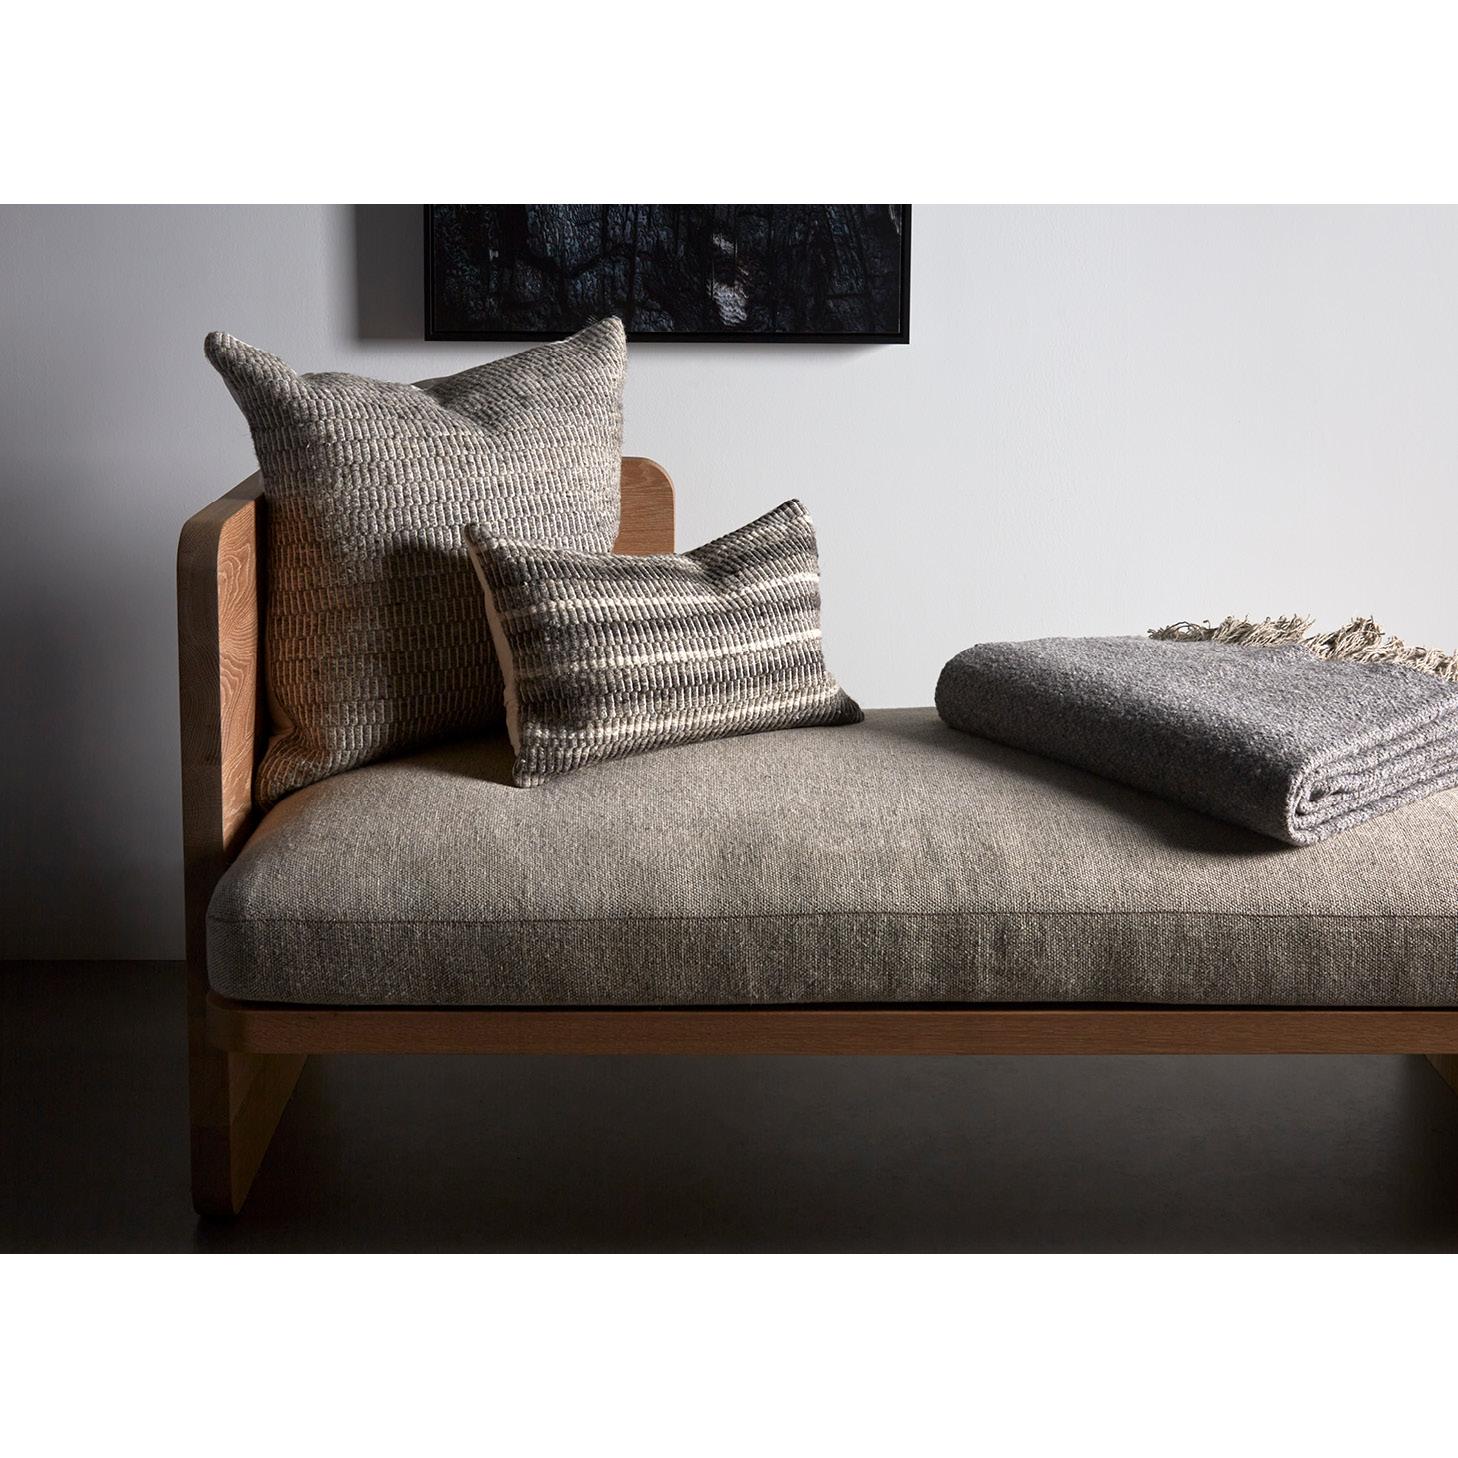 Travail du bois Provident Series - Day Bed in solid Oak and Belgium Linen Upholstery en vente